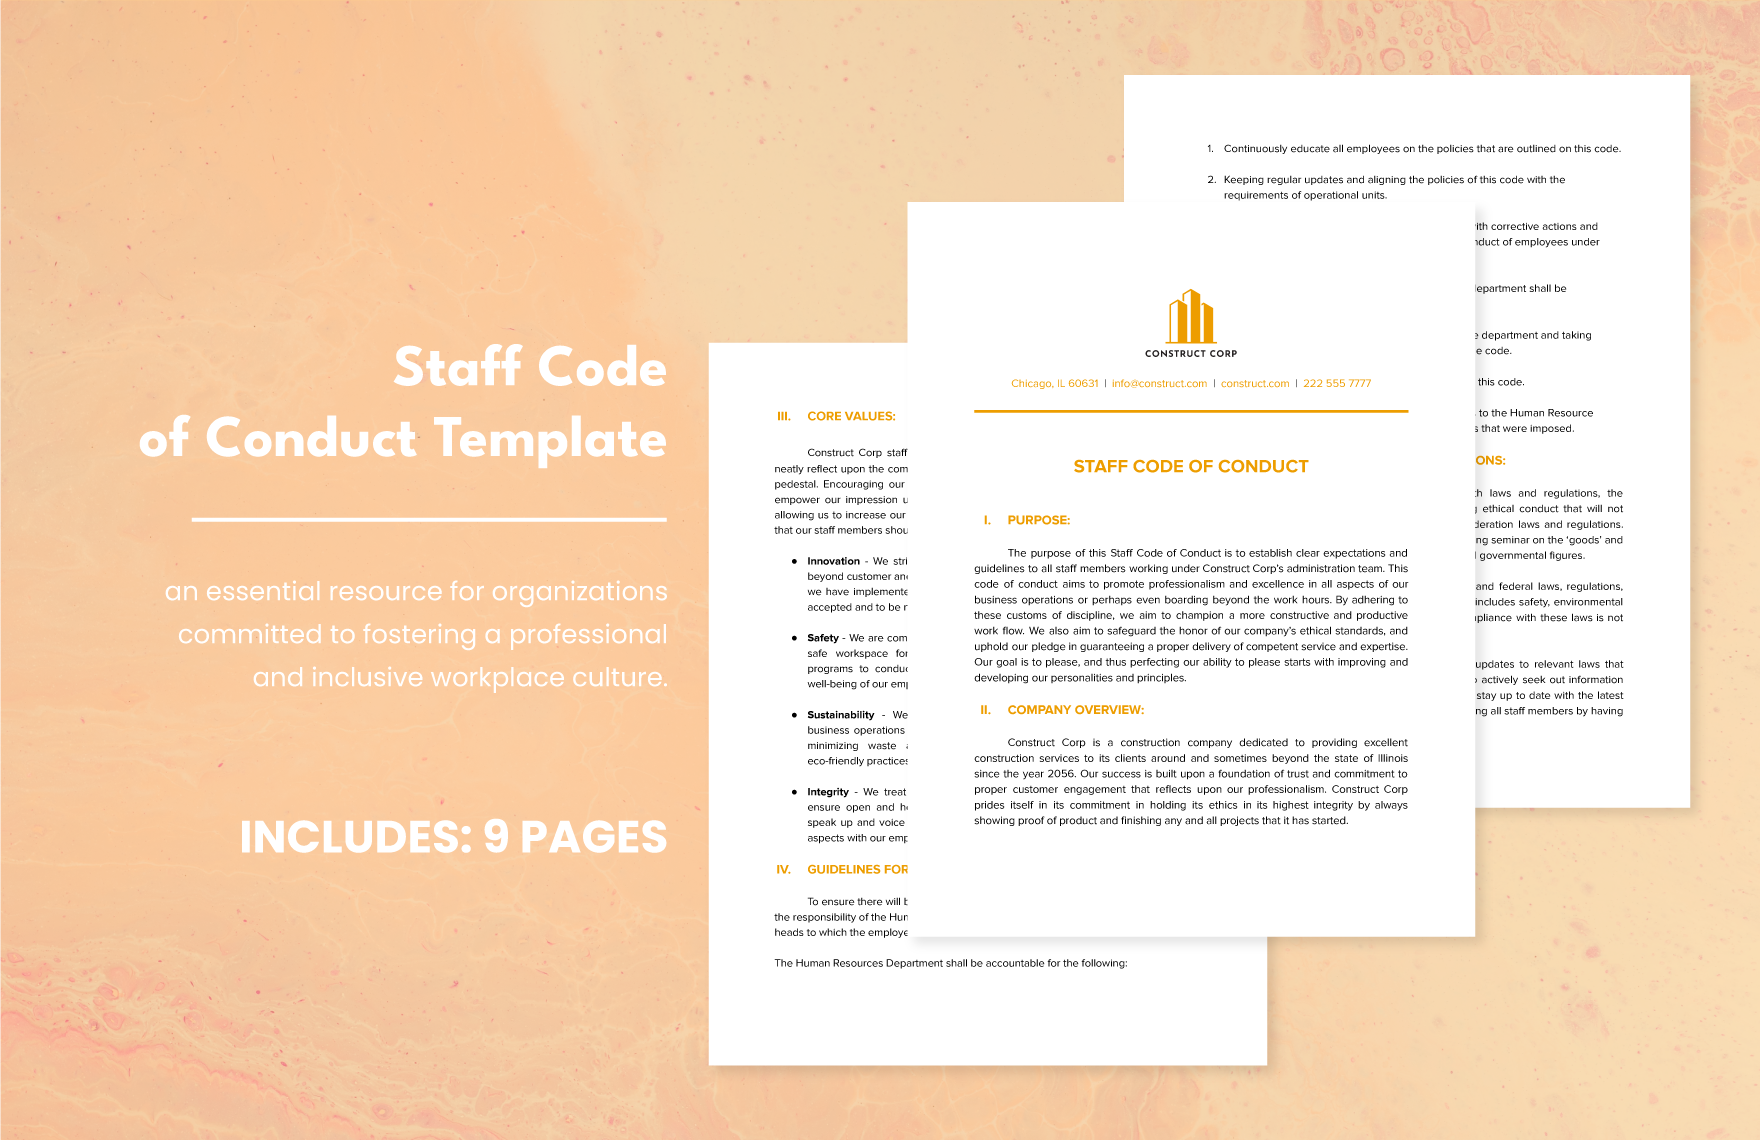 Staff Code of Conduct Template in Word